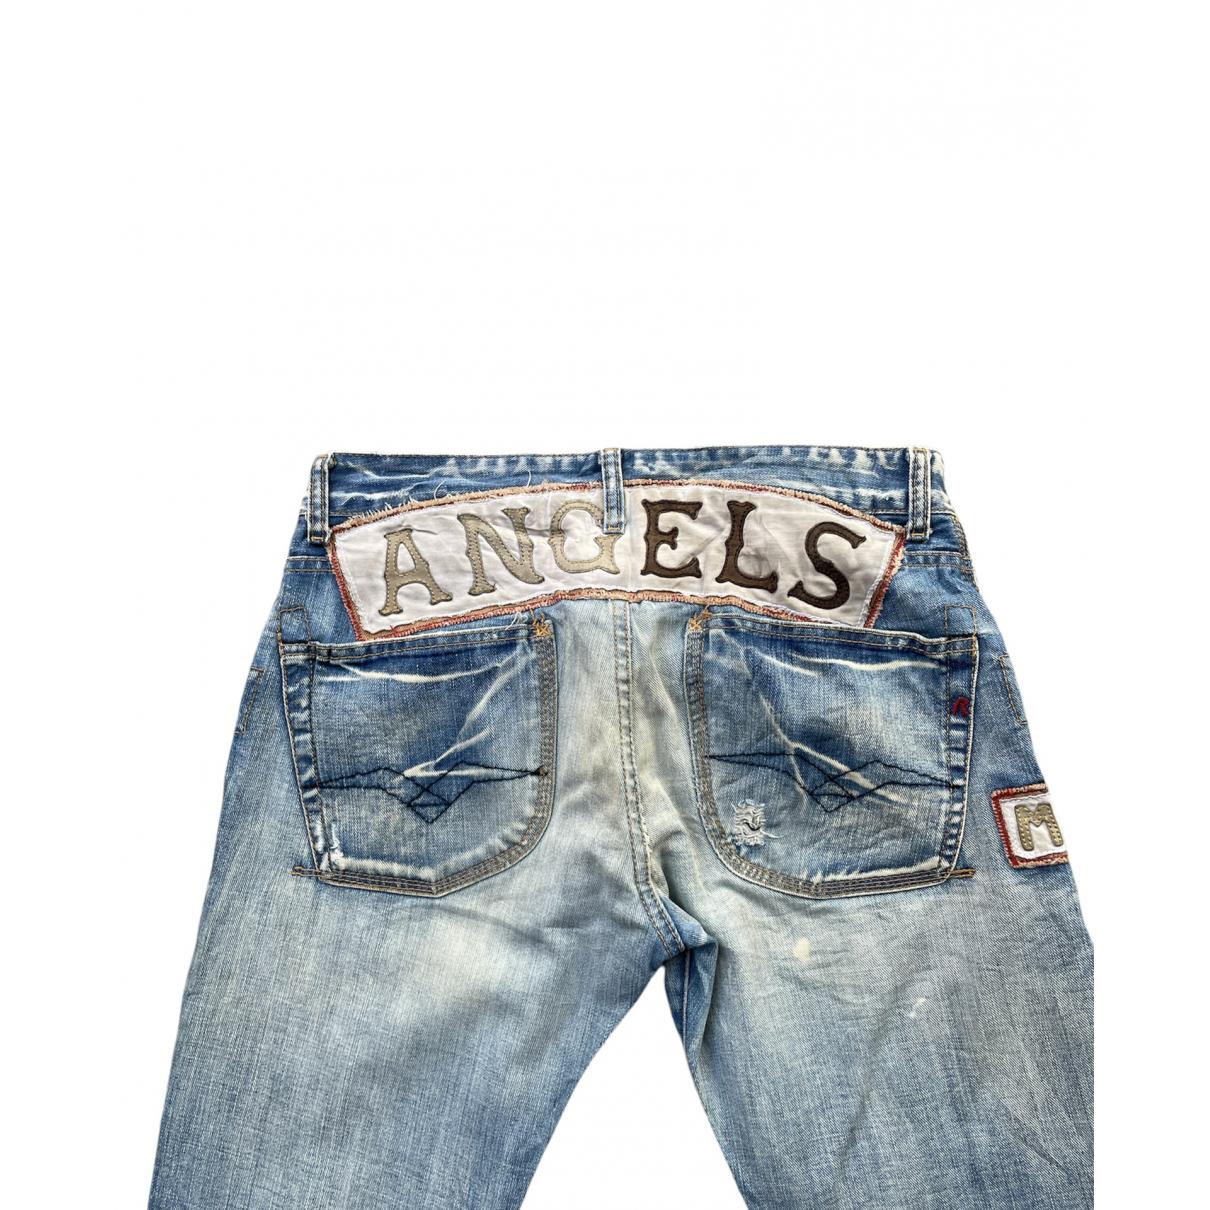 Jeans Replay Blue size 33 - 22231757 Cotton US in